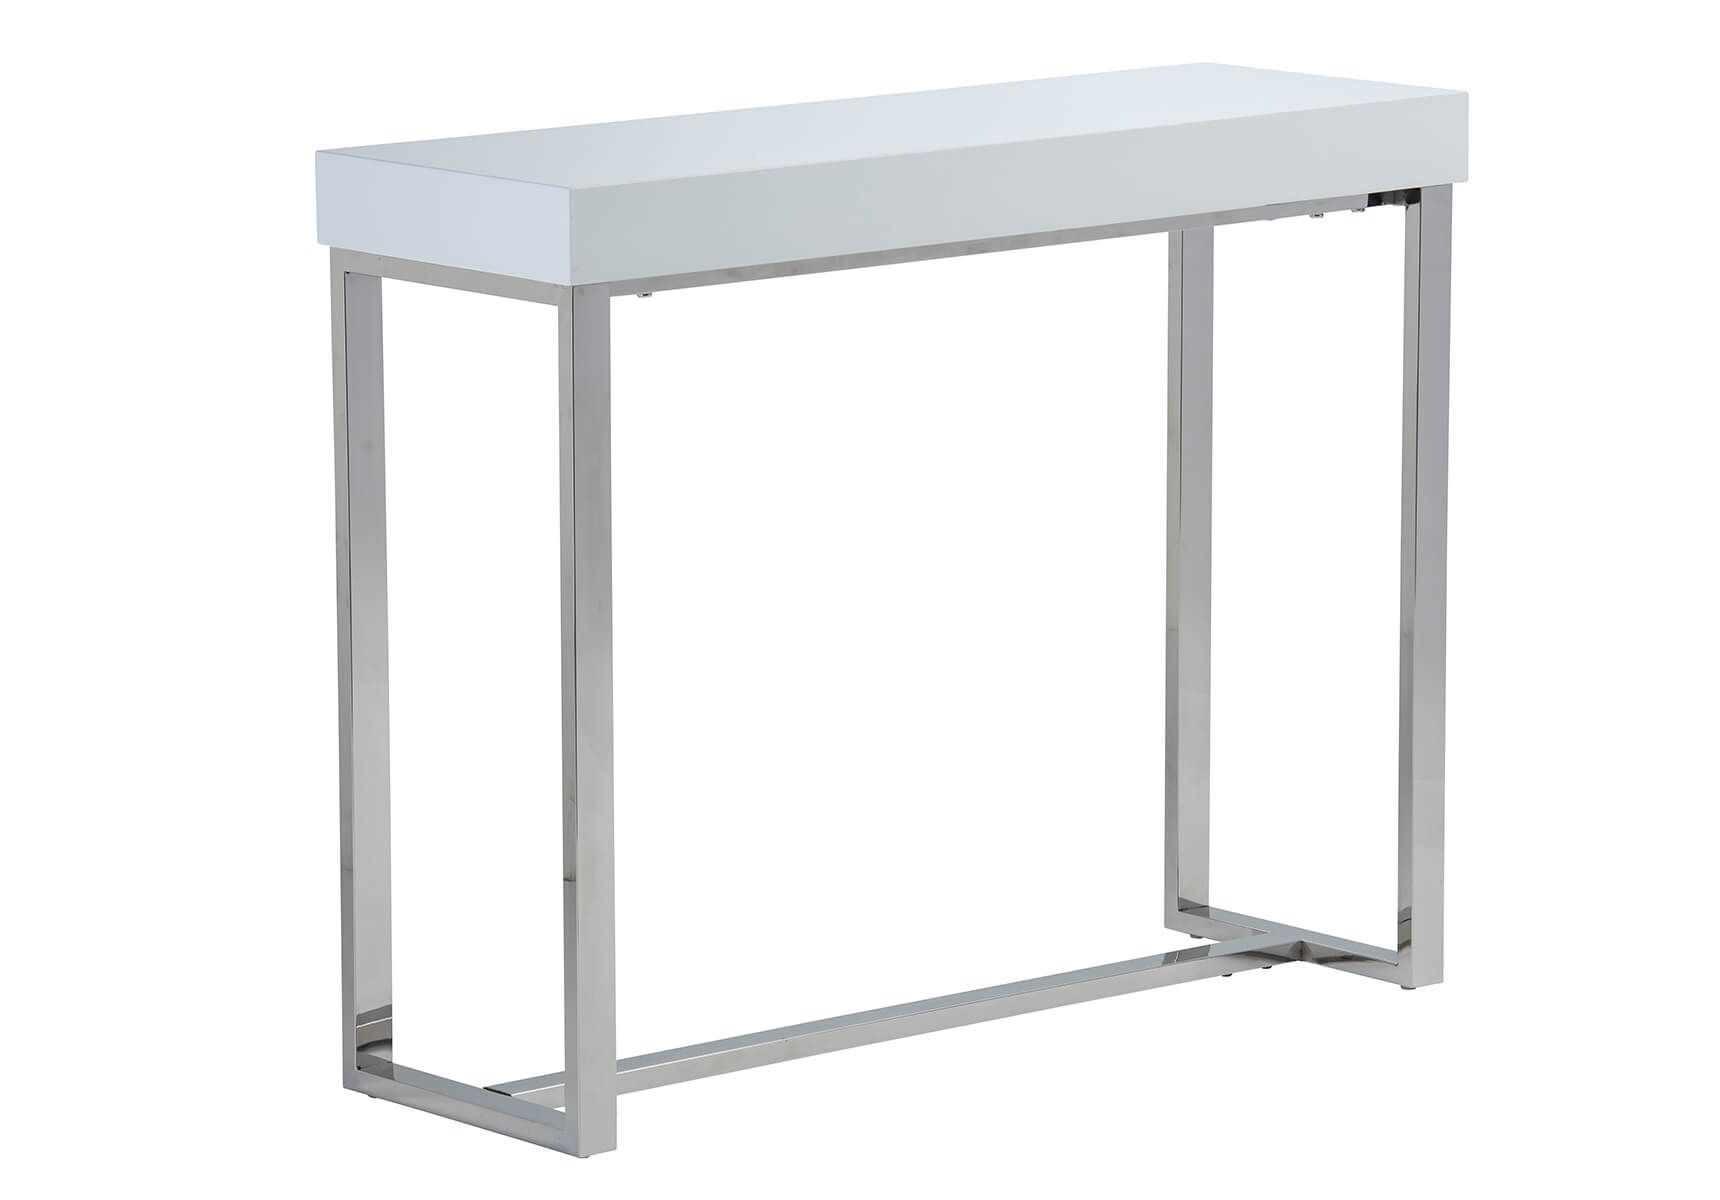 Franklin Console Table In White Gloss With Gloss White Steel Console Tables (View 4 of 20)